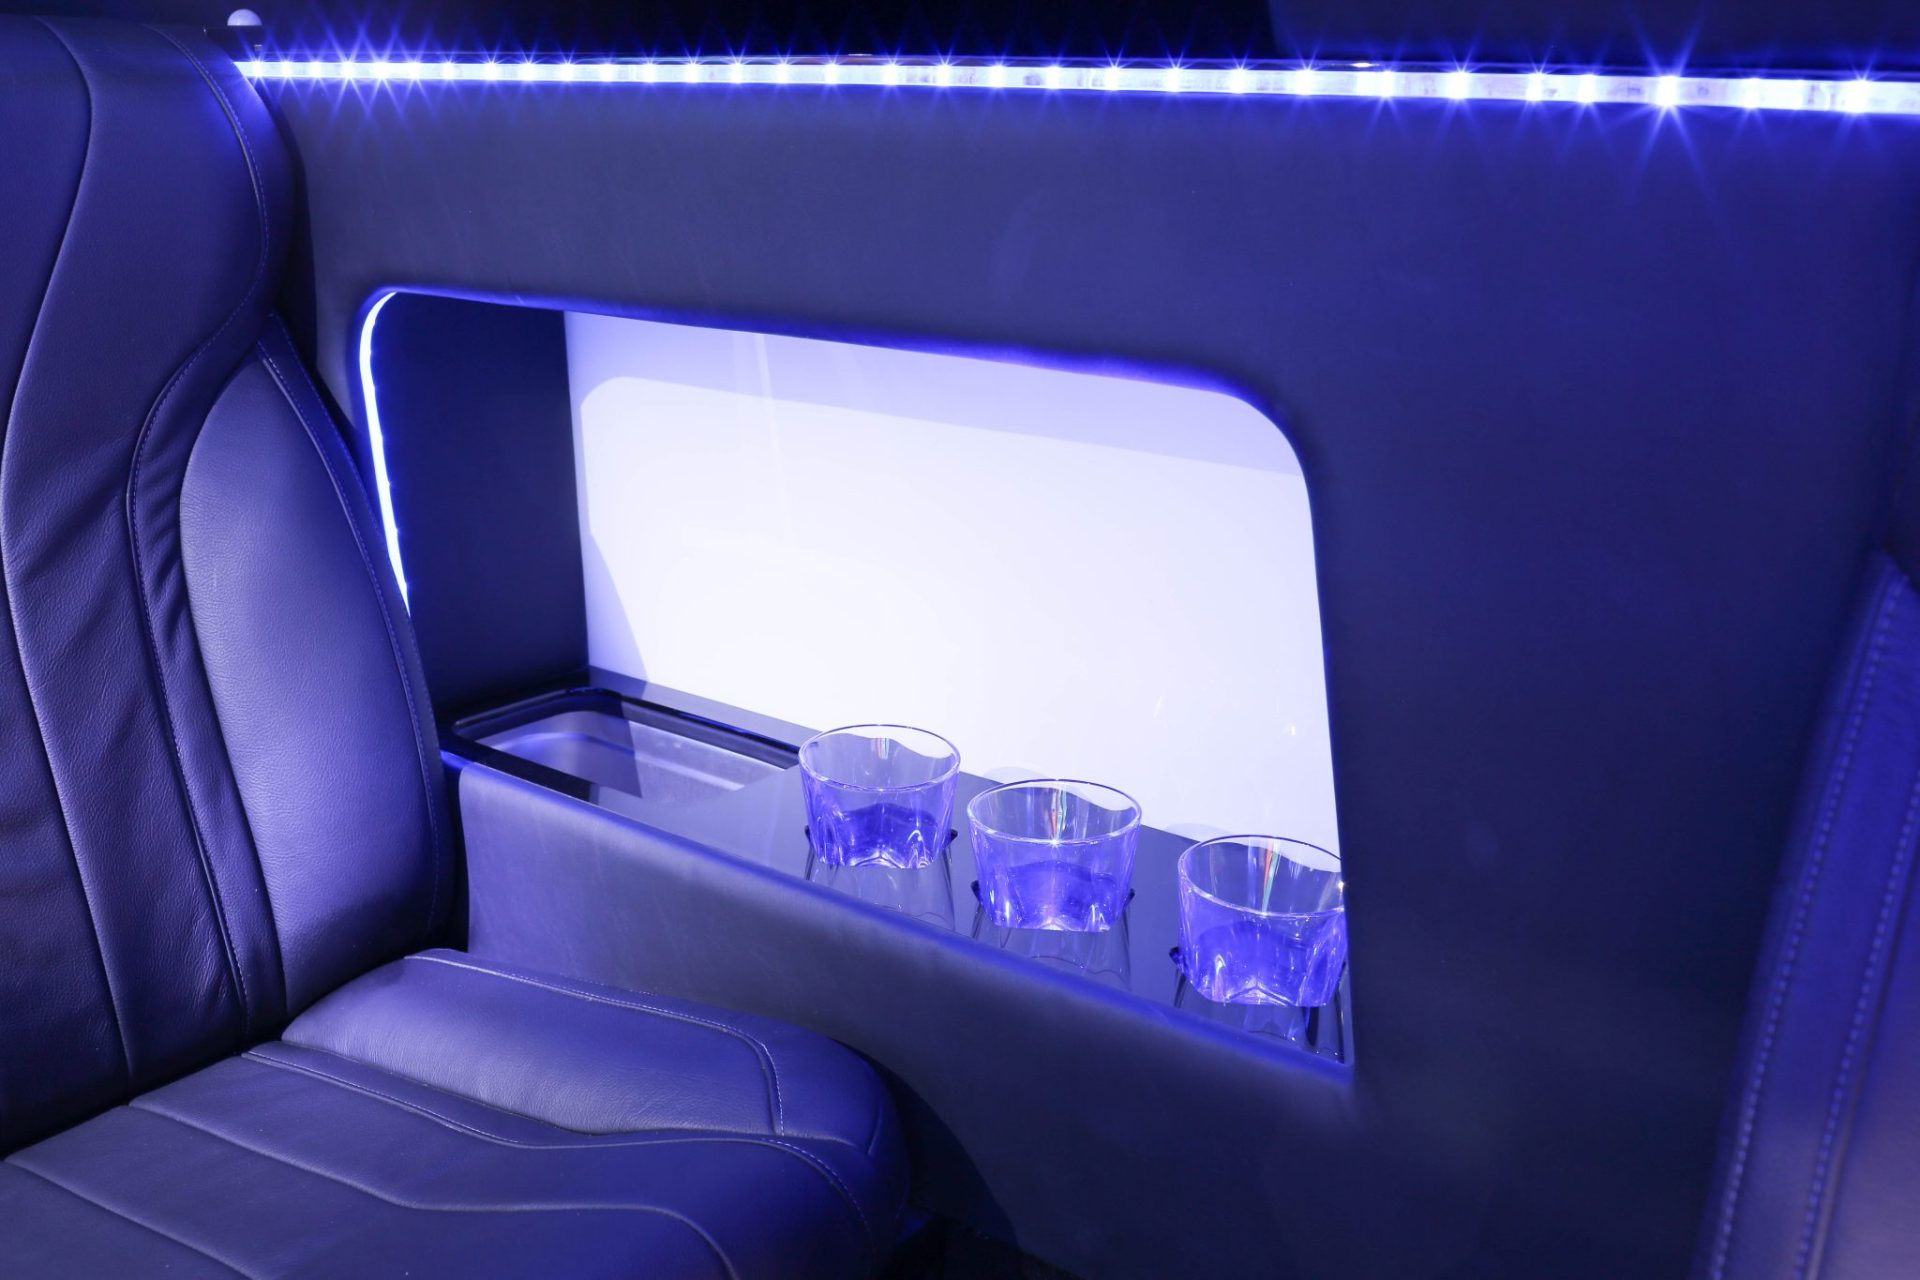 Mercedes Benz S-Class Stretched Limousine - Interior Photo #20